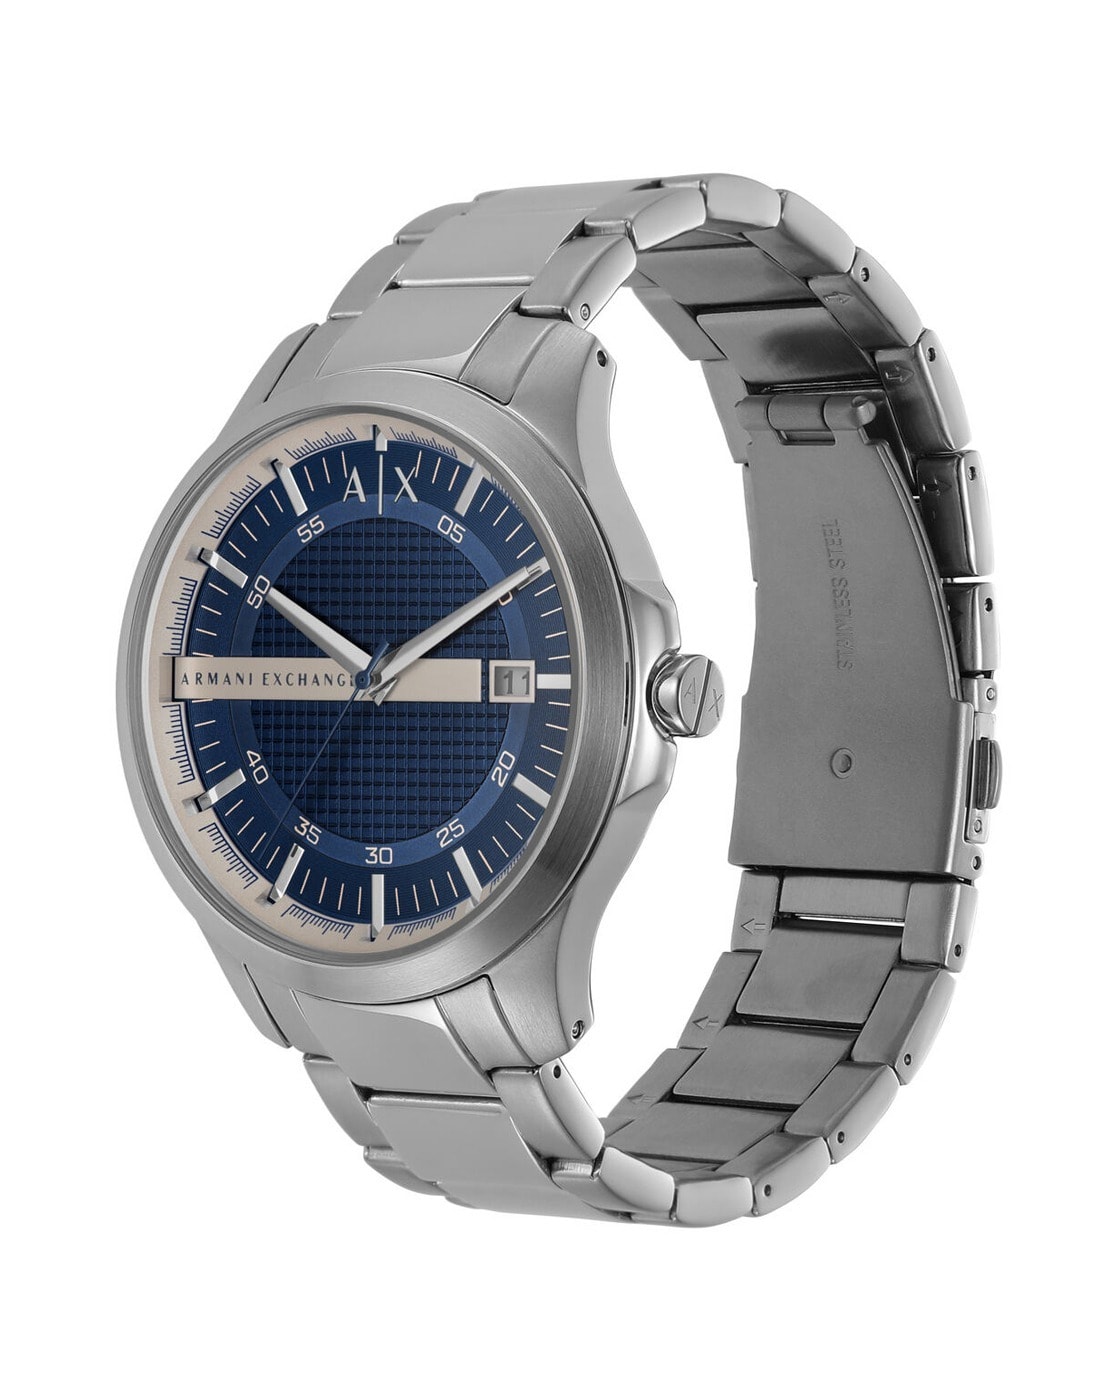 Buy Watches EXCHANGE ARMANI Online for by Men